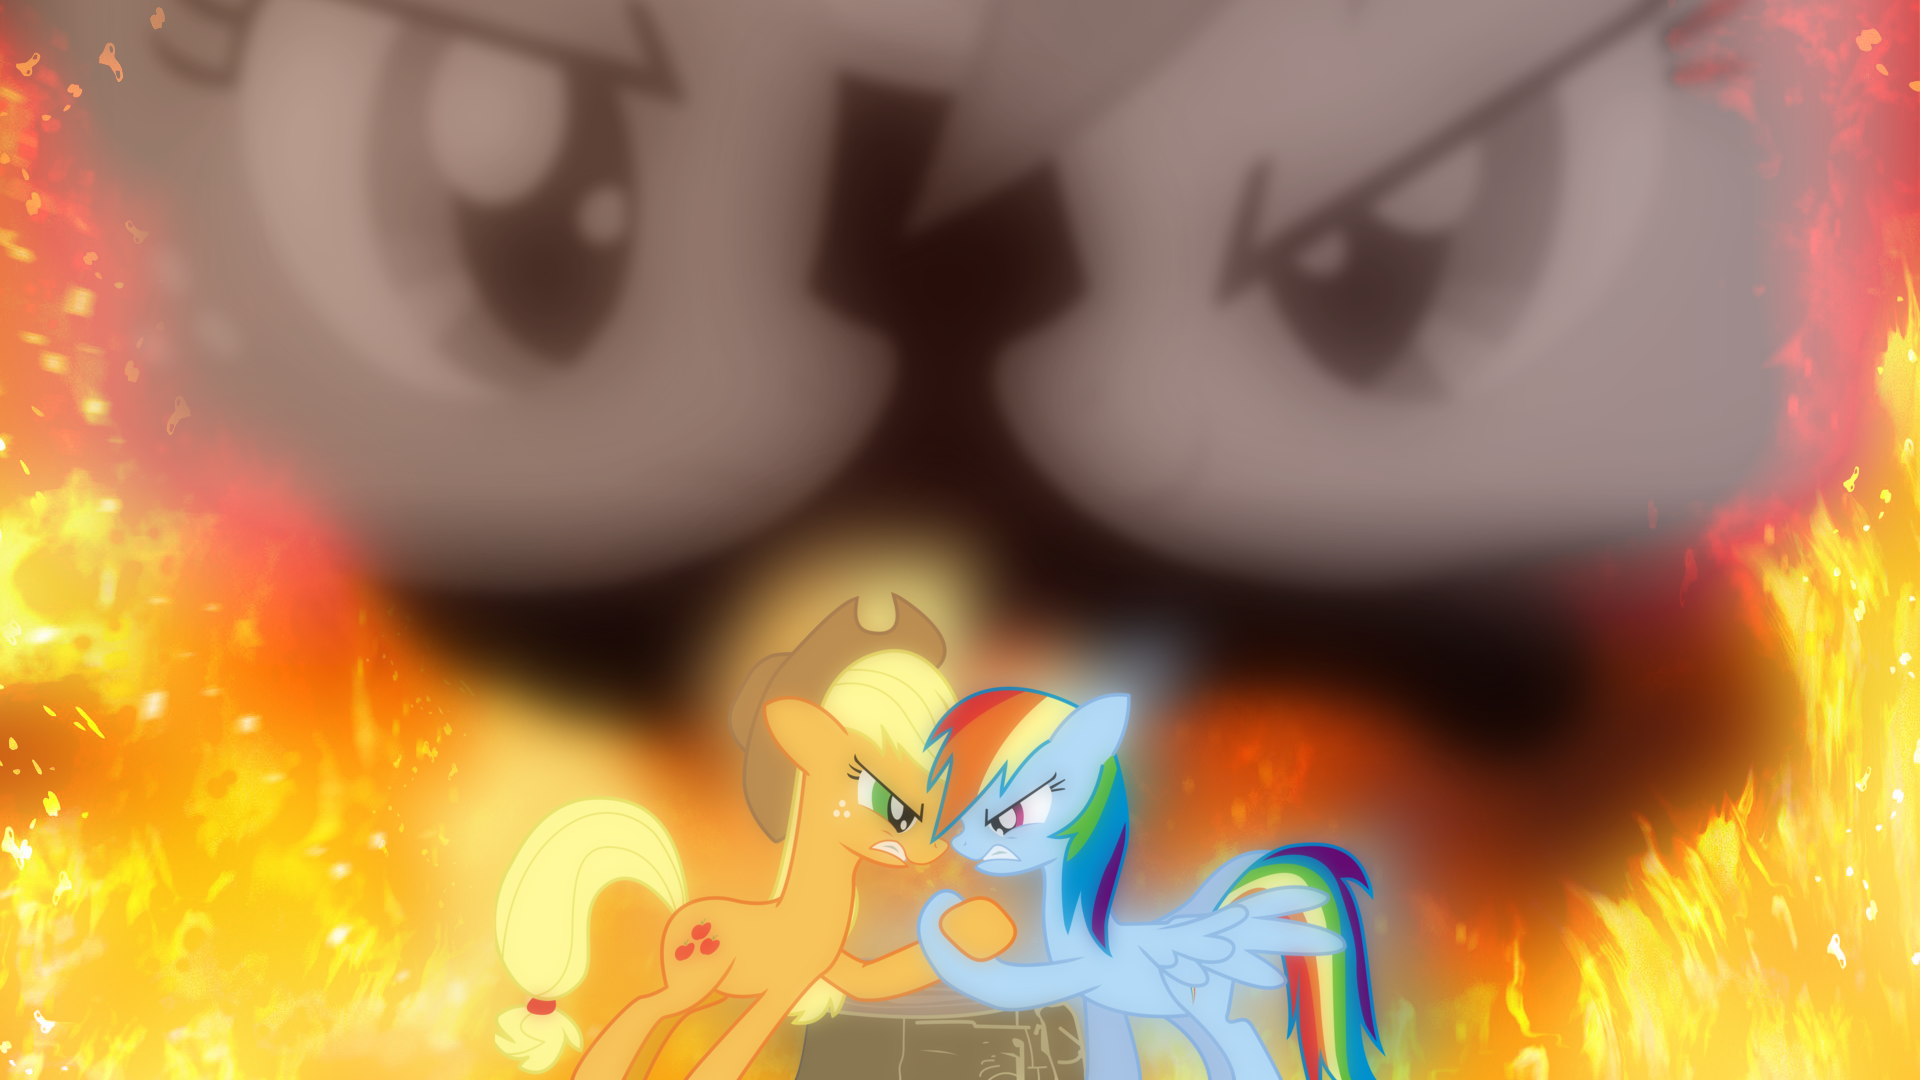 The fire friendship by romus91